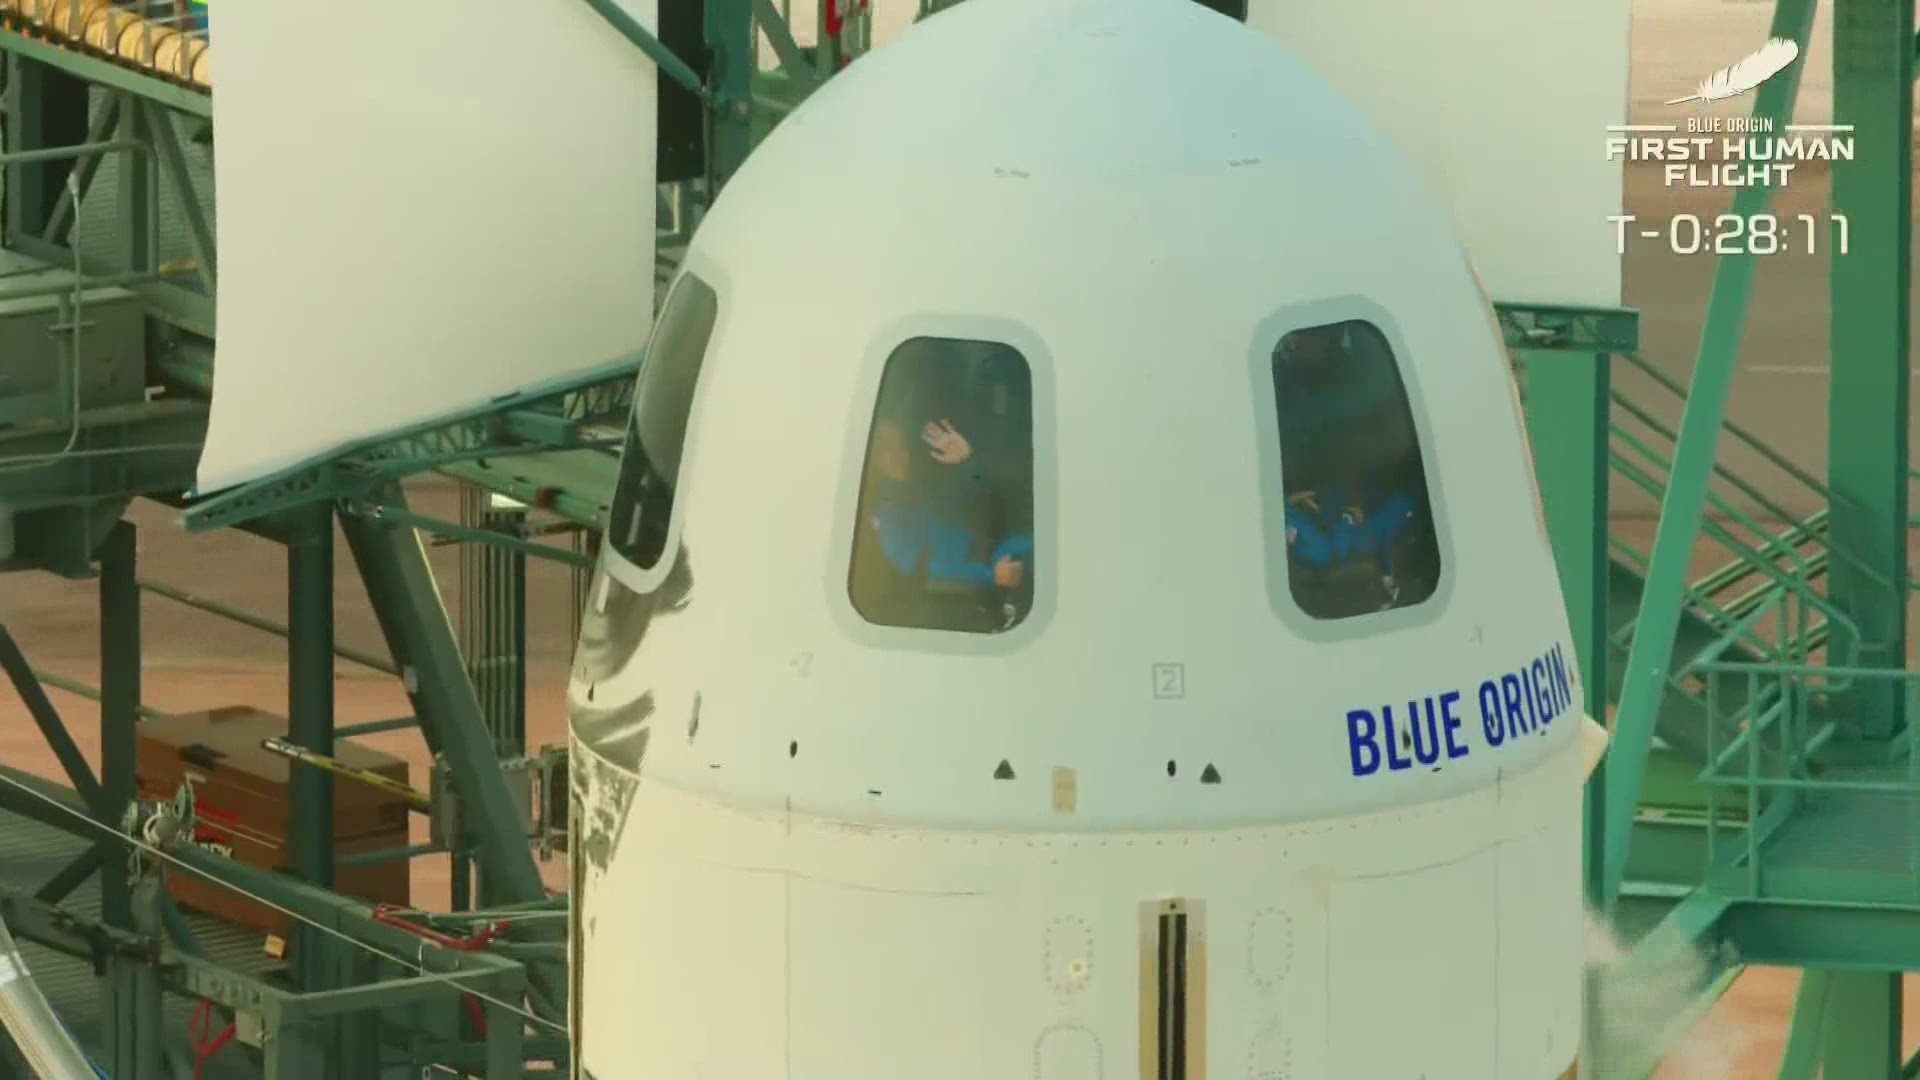 Jeff Bezos, his younger brother Mark, Wally Funk and Oliver Daemen board the New Shepard rocket for Blue Origin's first flight with people on board.